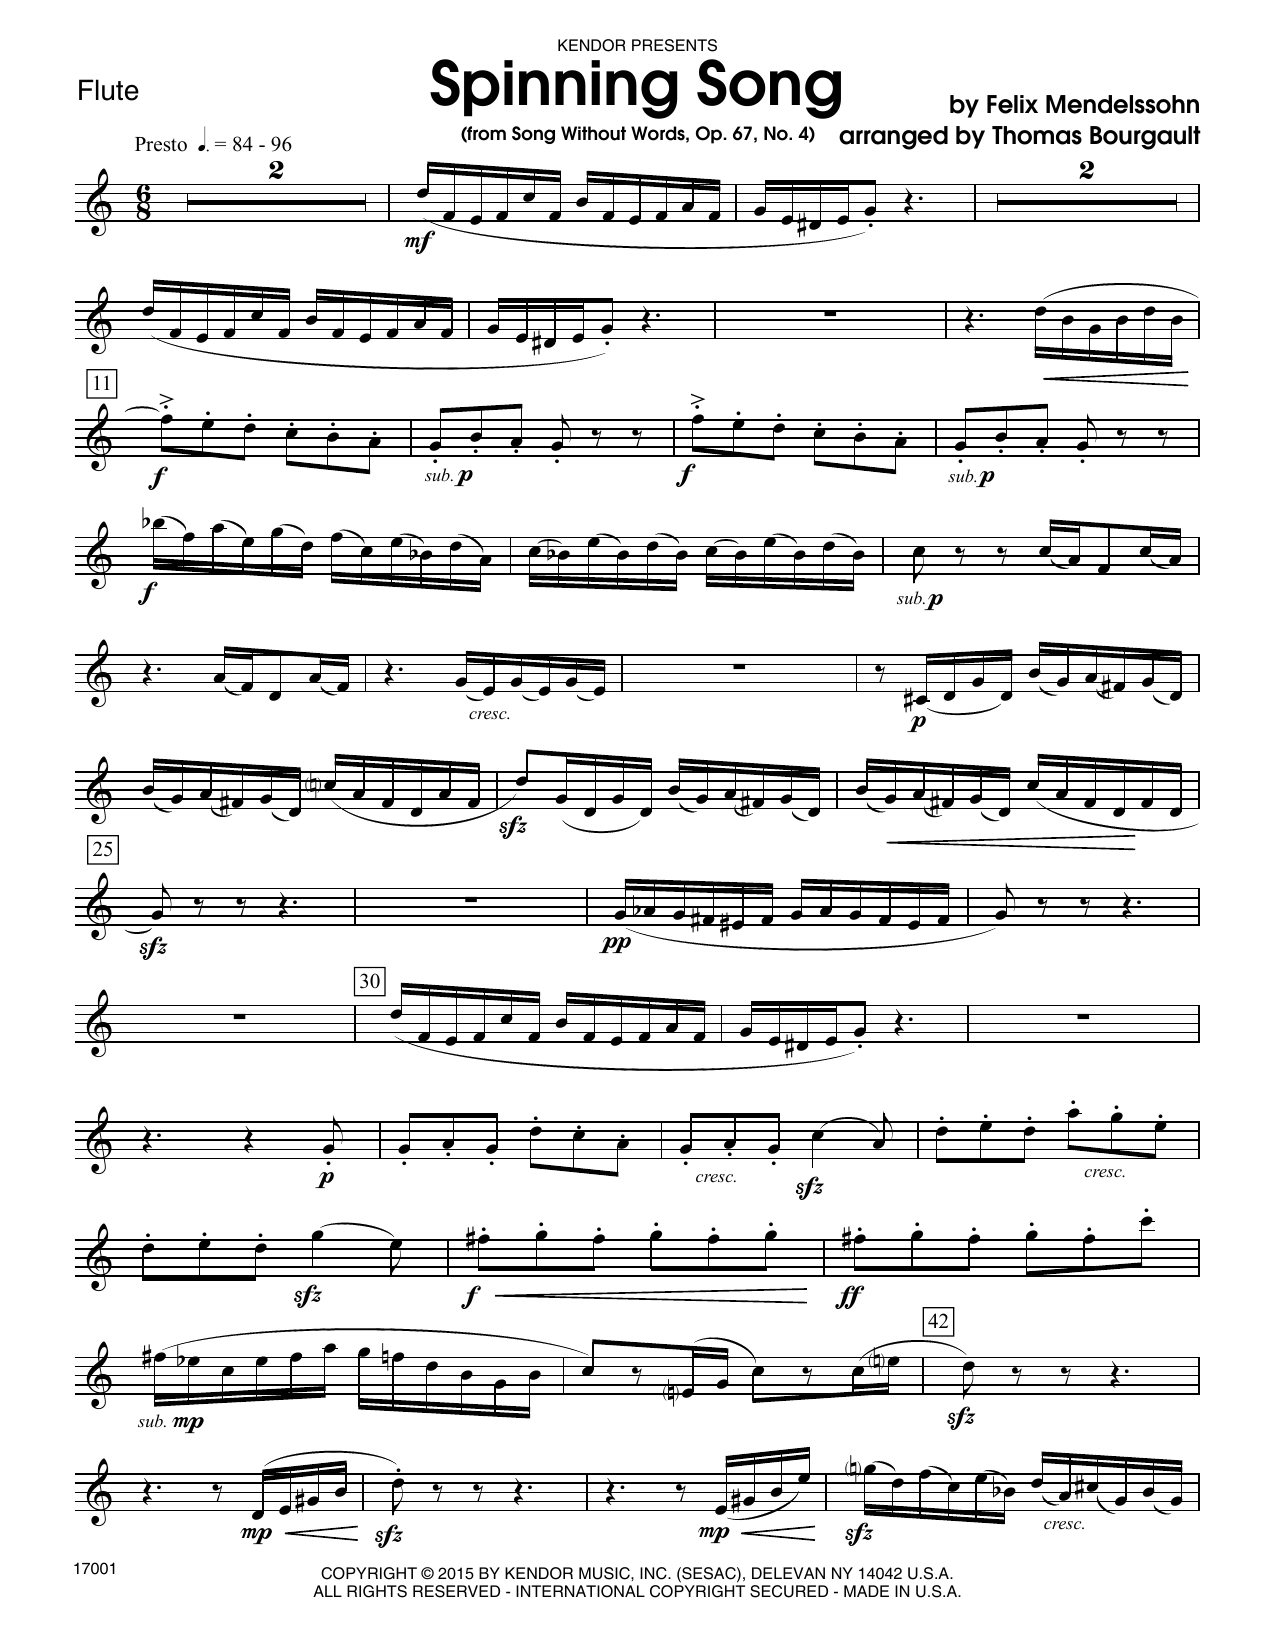 Download Thomas Bourgault Spinning Song (from Song Without Words, Sheet Music